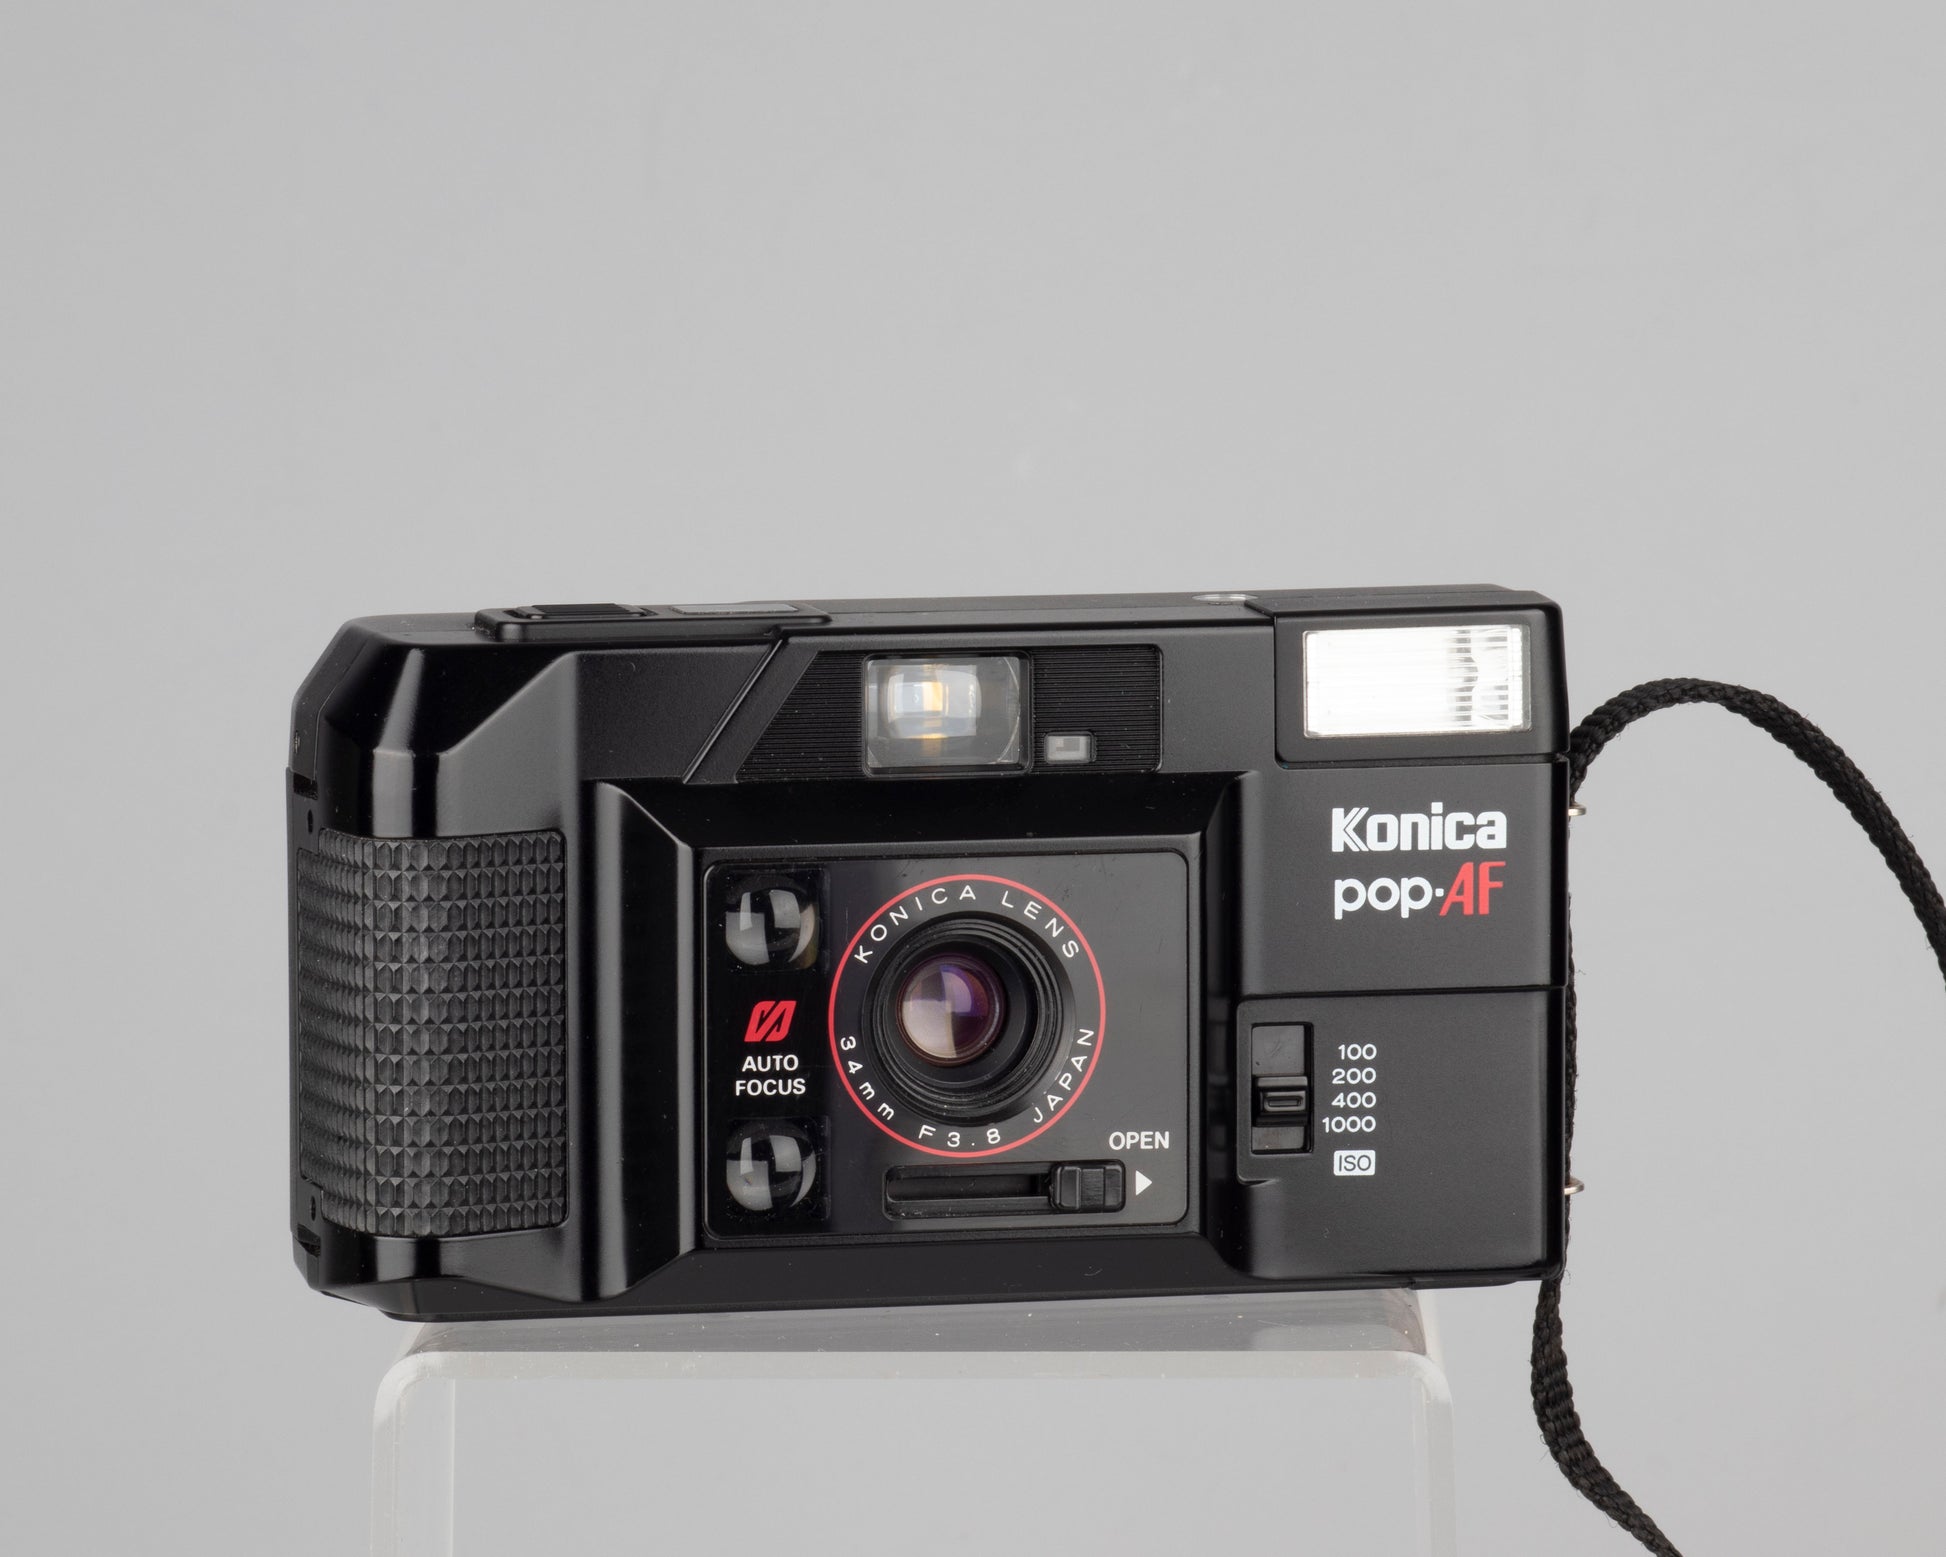 The Konica Pop-AF is a Japanese-made 35mm point-and-shoot from the 1980s featuring a 34mm f3.8 lens